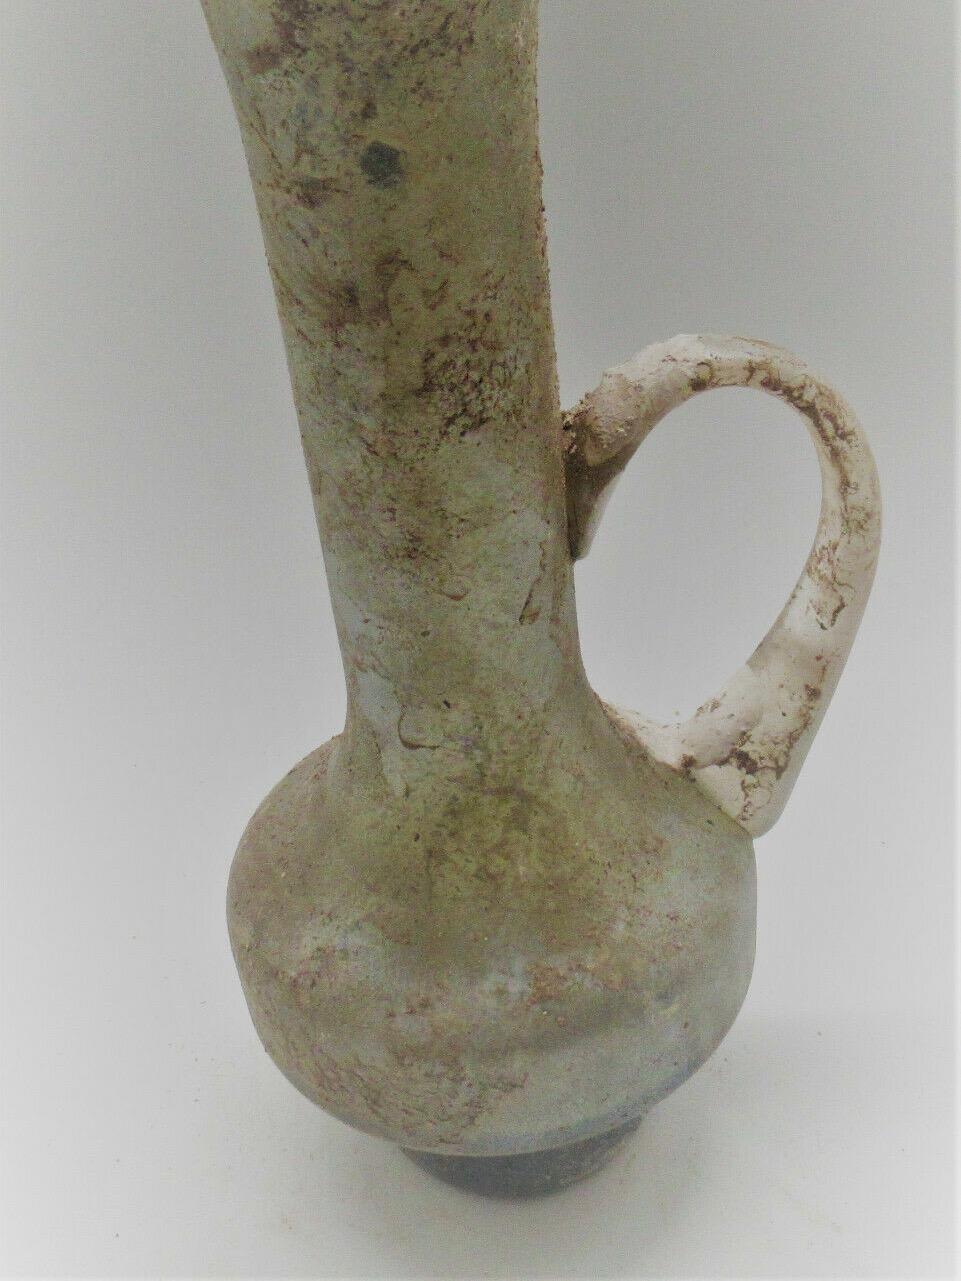 Museum quality ancient roman glass juglet with handle 200-300 AD
this is a lovely small vase, jar 26cm
total width with handle 13 cm
ancient roman glass
dark, silver, green, white fluorescent glass
¨aqua glasses¨.